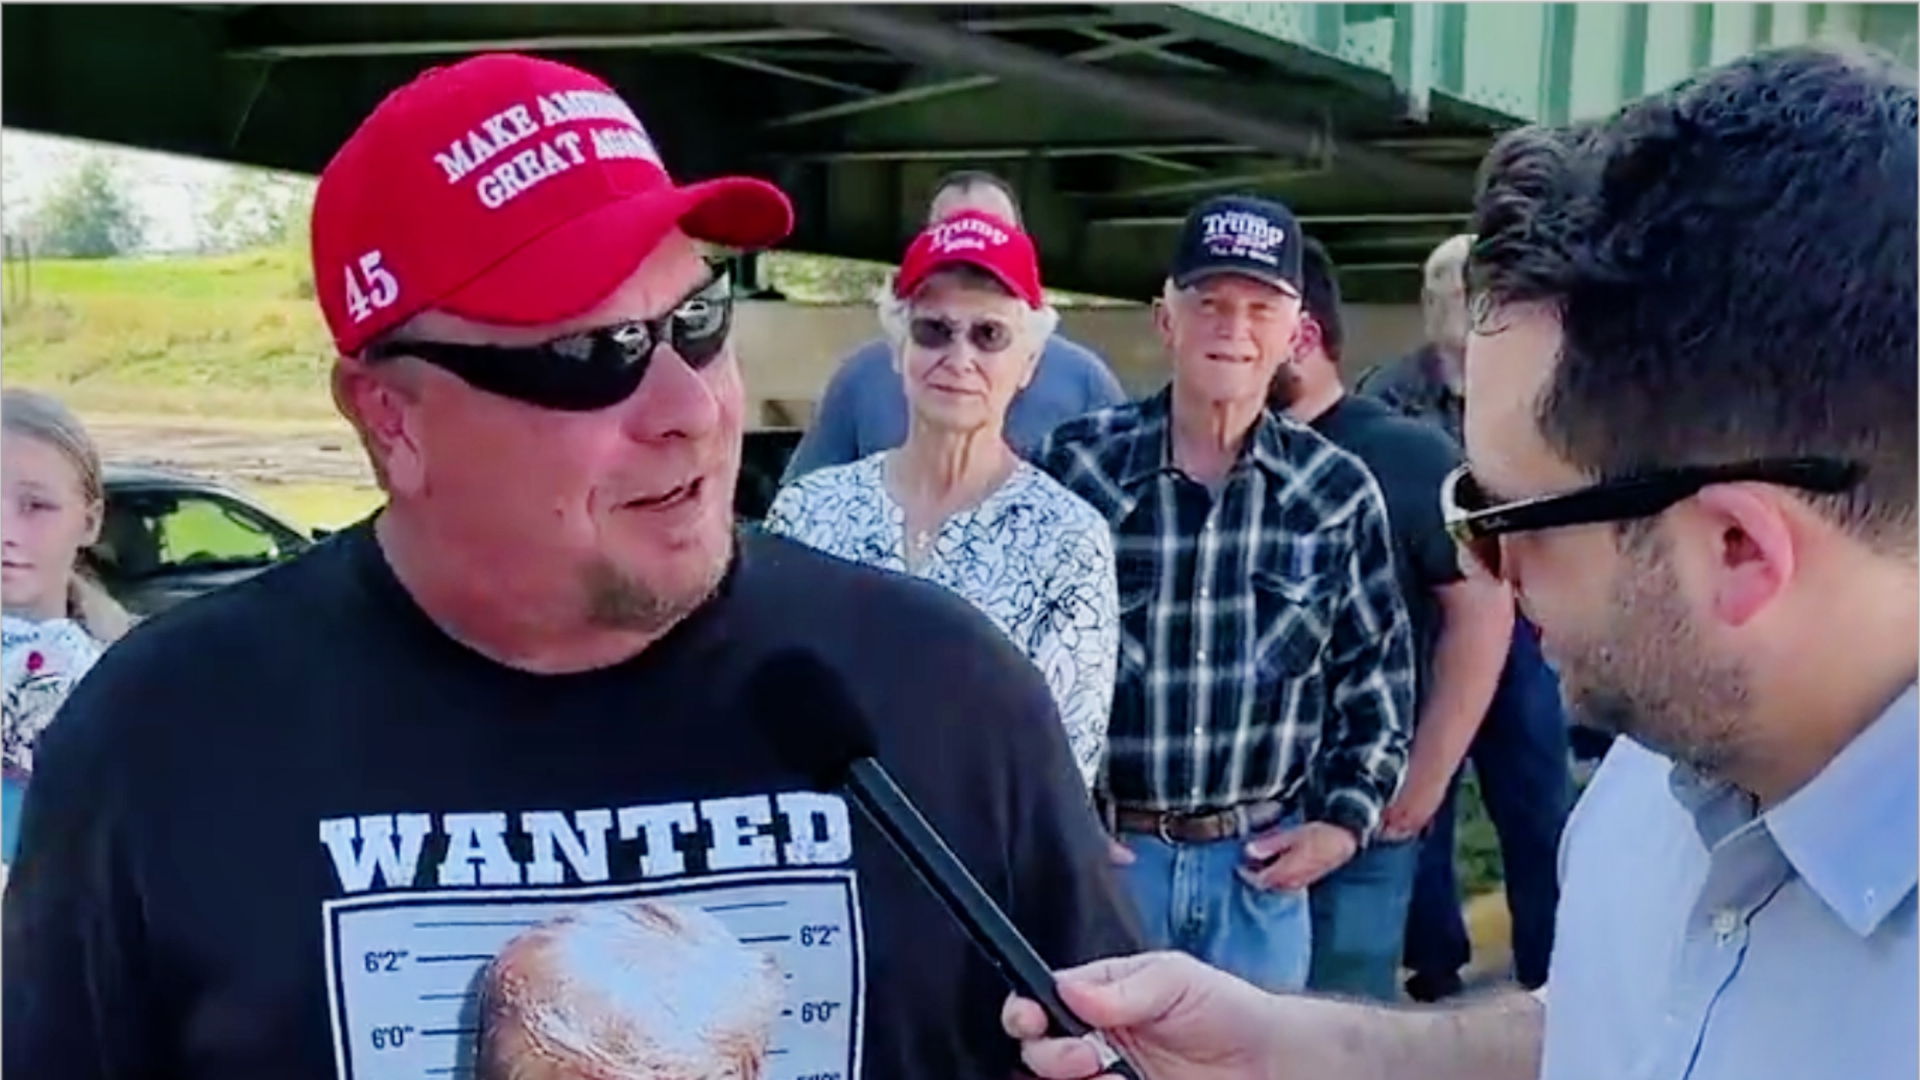 ‘That’s Literally a Picture of Him Surrendering!’ Trump Fan Confronted Outside Rally Over His ‘Never Surrender’ T-Shirt